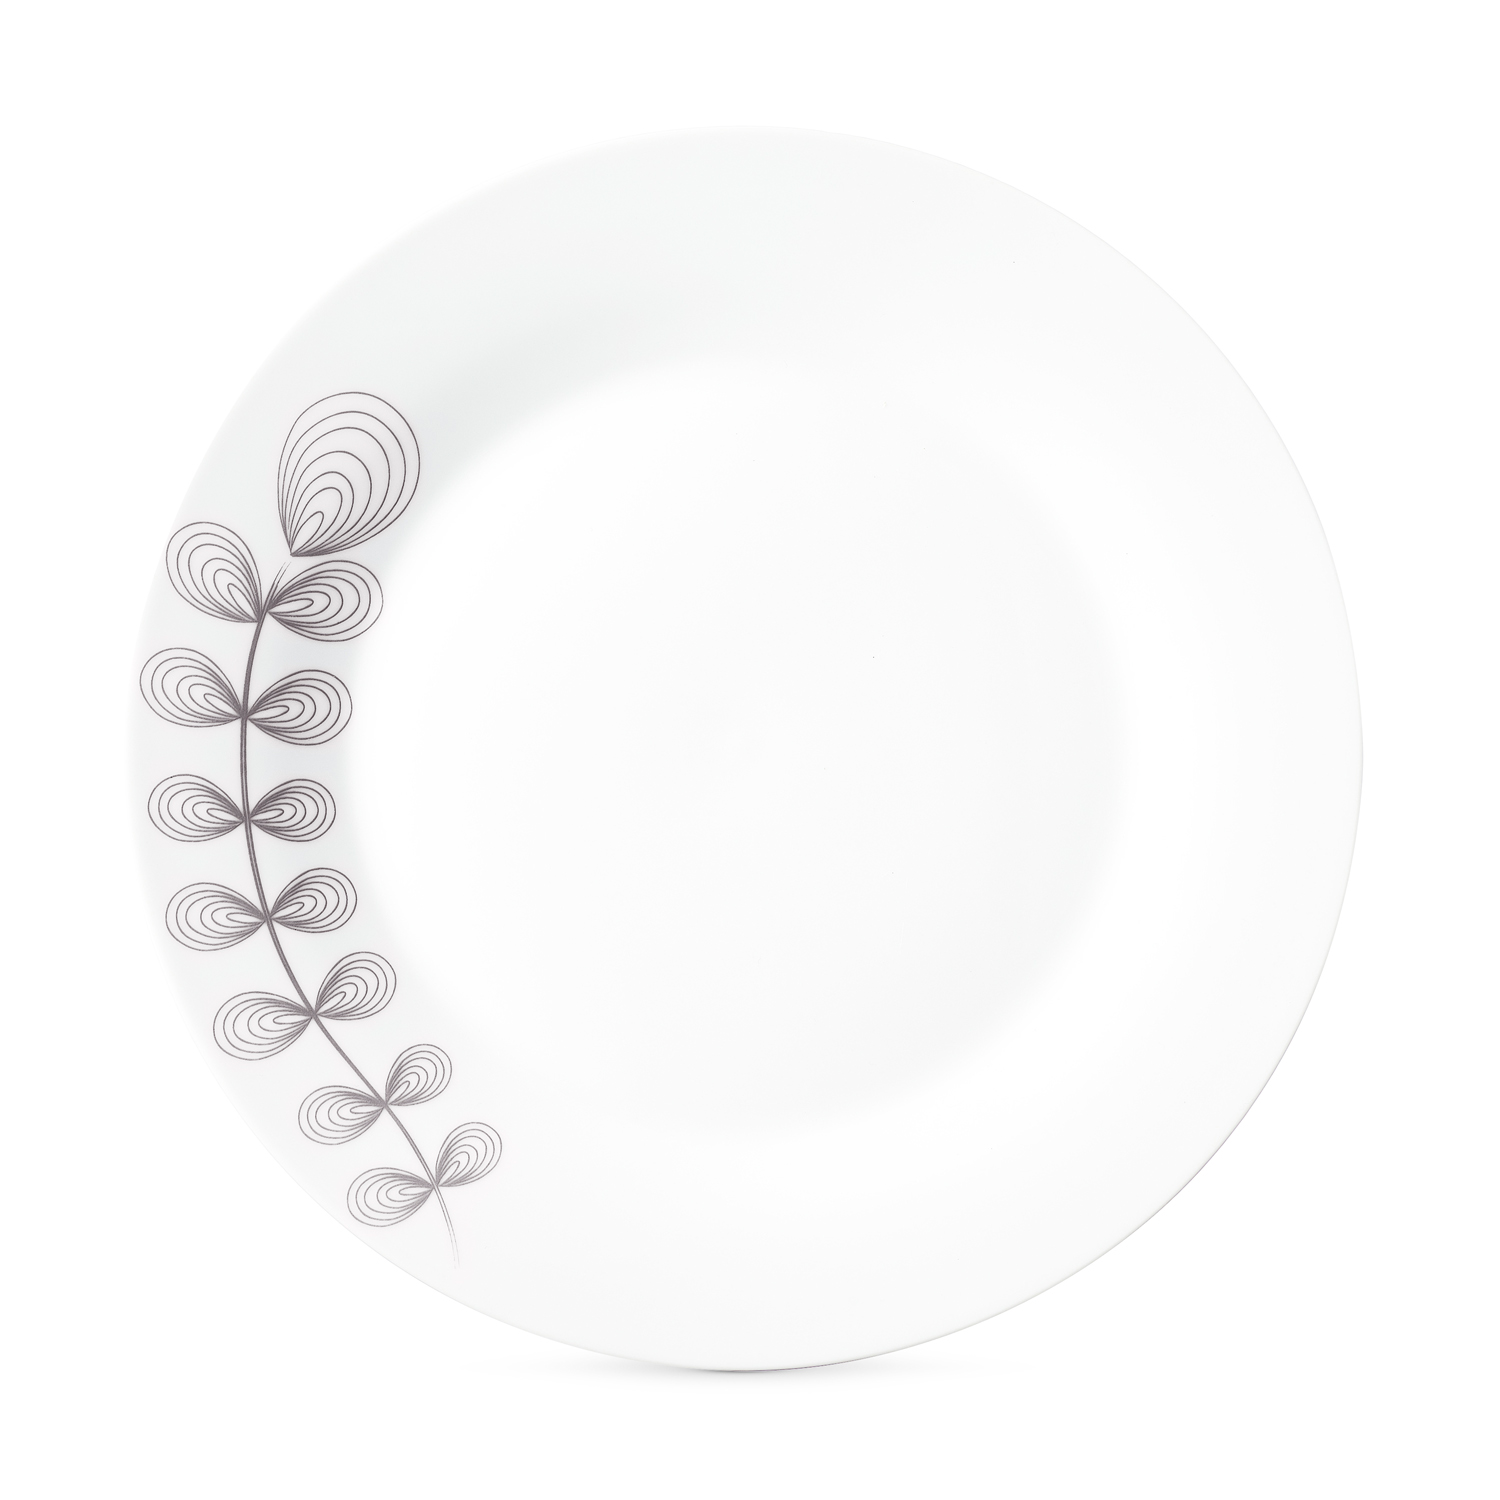 April Floral Collection Taupe 12-Piece Porcelain Dinnerware Set, Walmart Exclusive - image 5 of 5